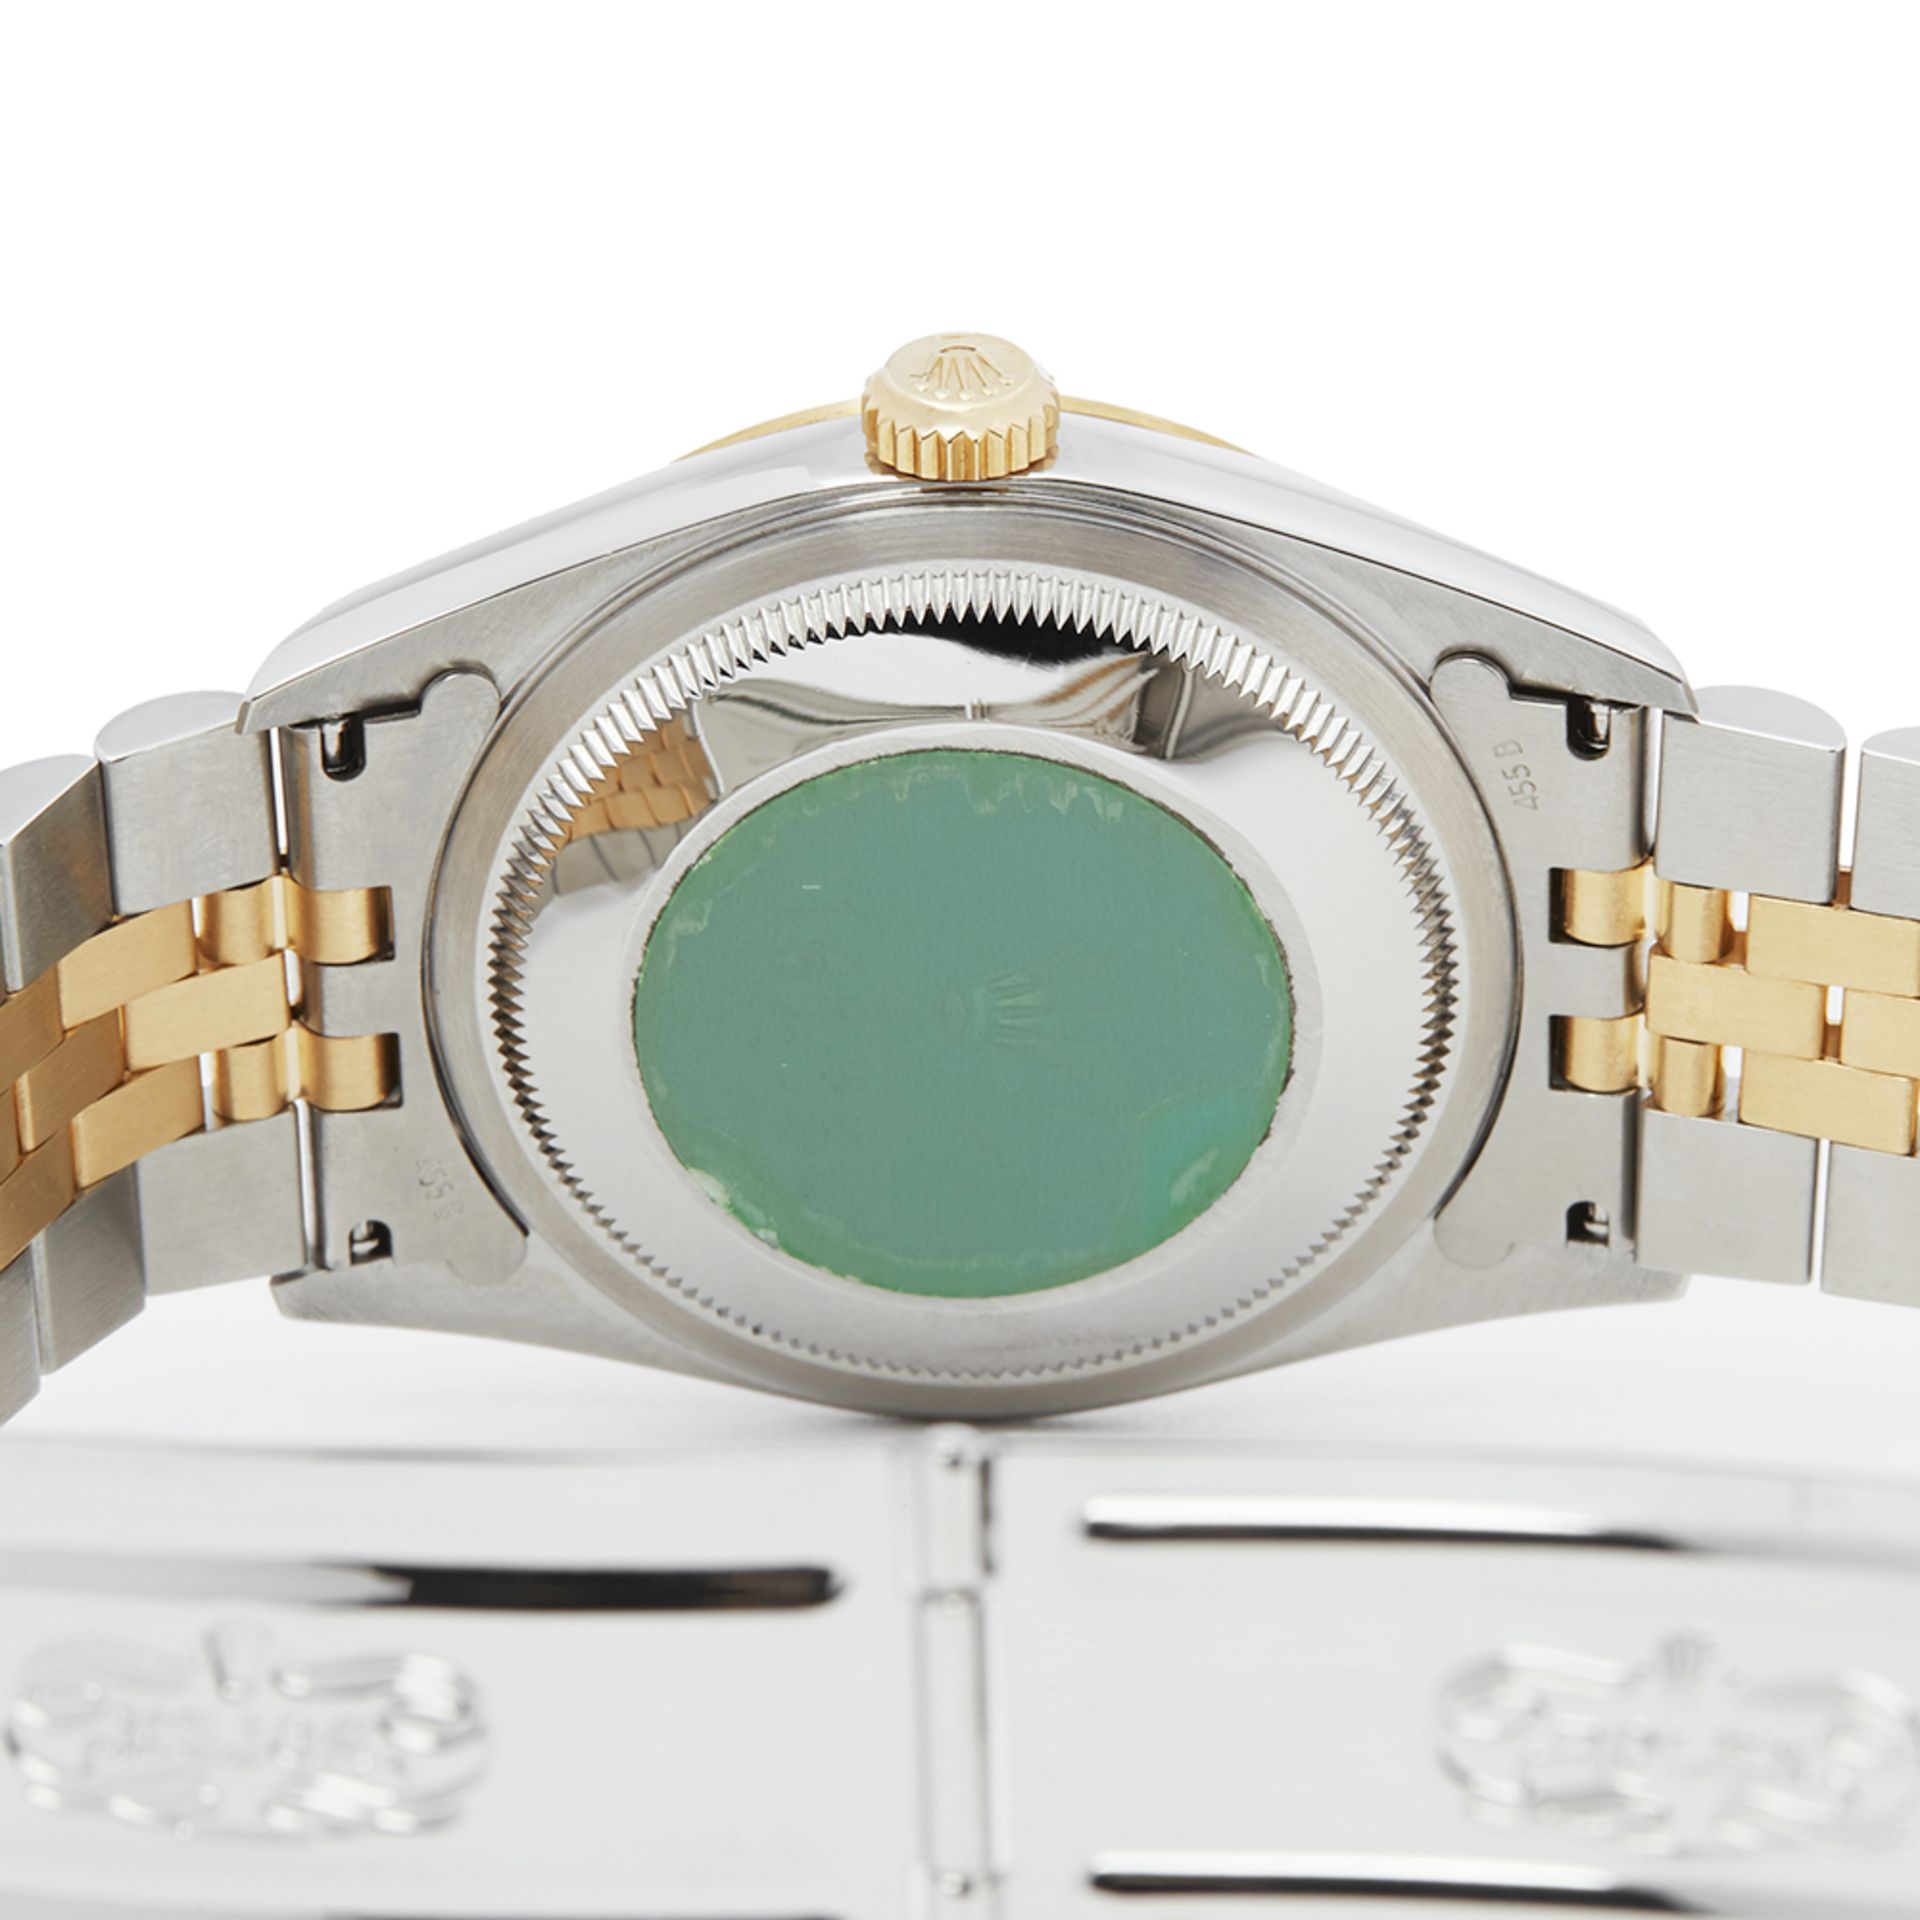 1997 Rolex DateJust 36 Mother of Pearl 18k Stainless Steel & Yellow Gold - 16233 - Image 3 of 6